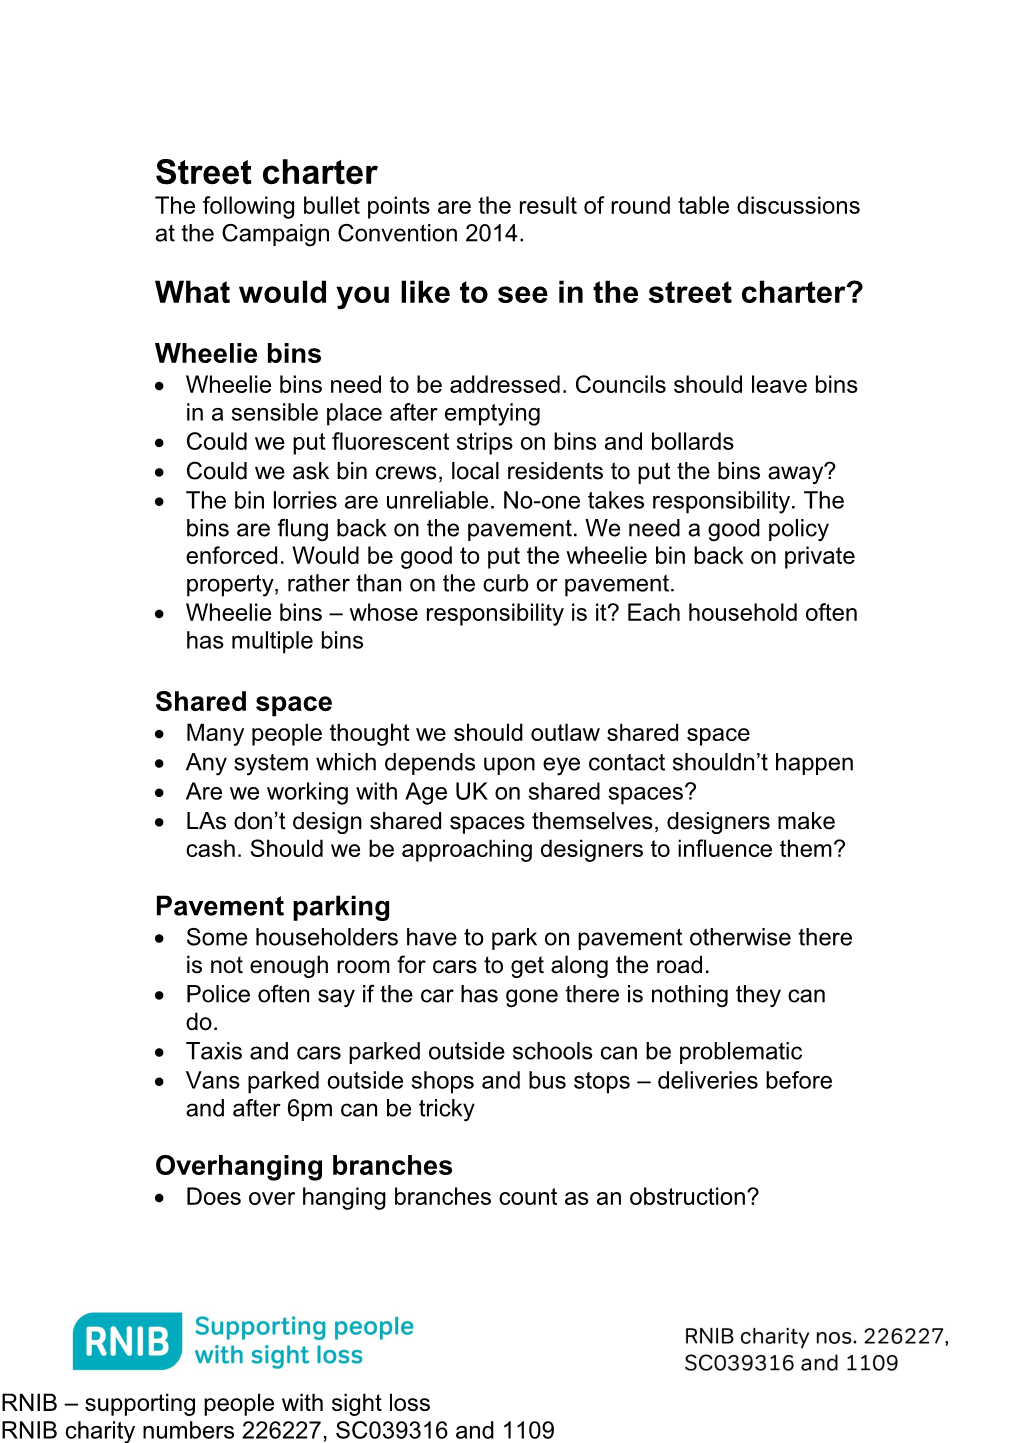 What Would You Like to See in the Street Charter?